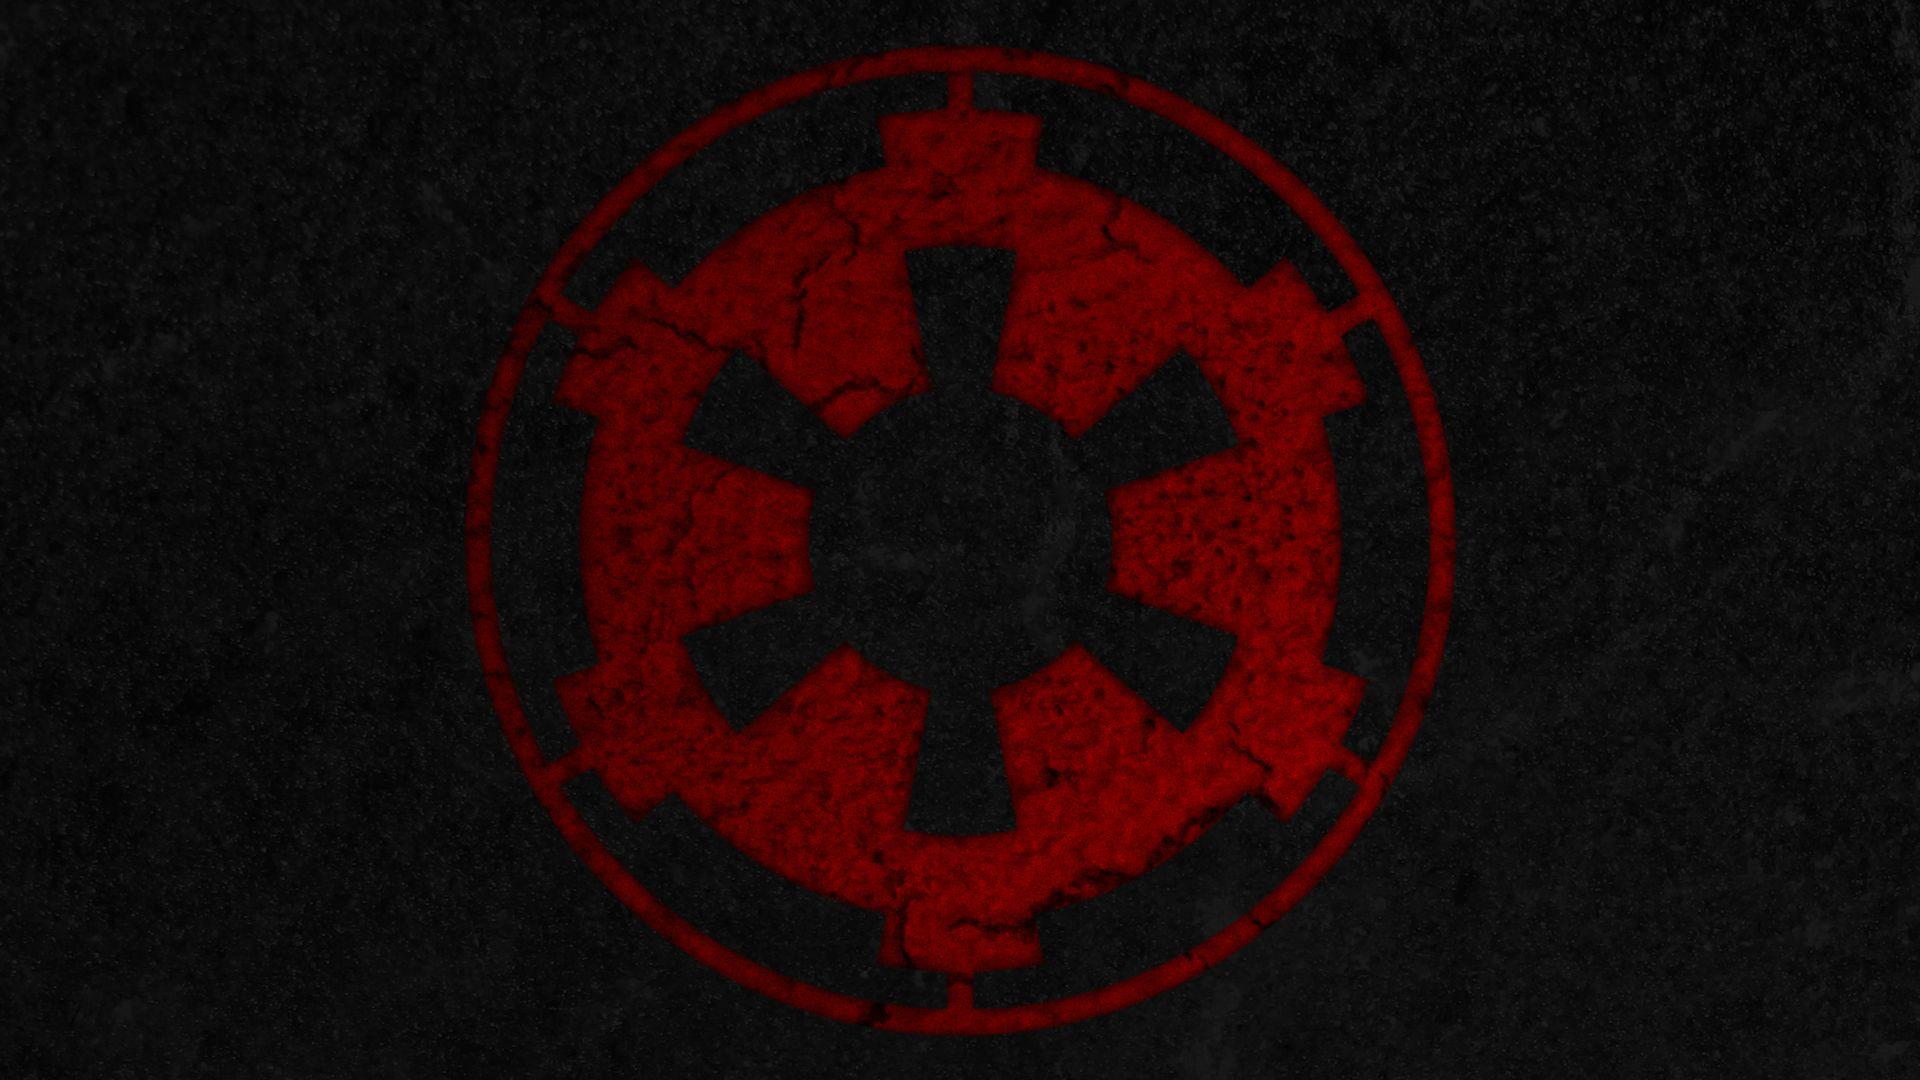 Empire   Star Wars Wallpaper for Phones and Tablets